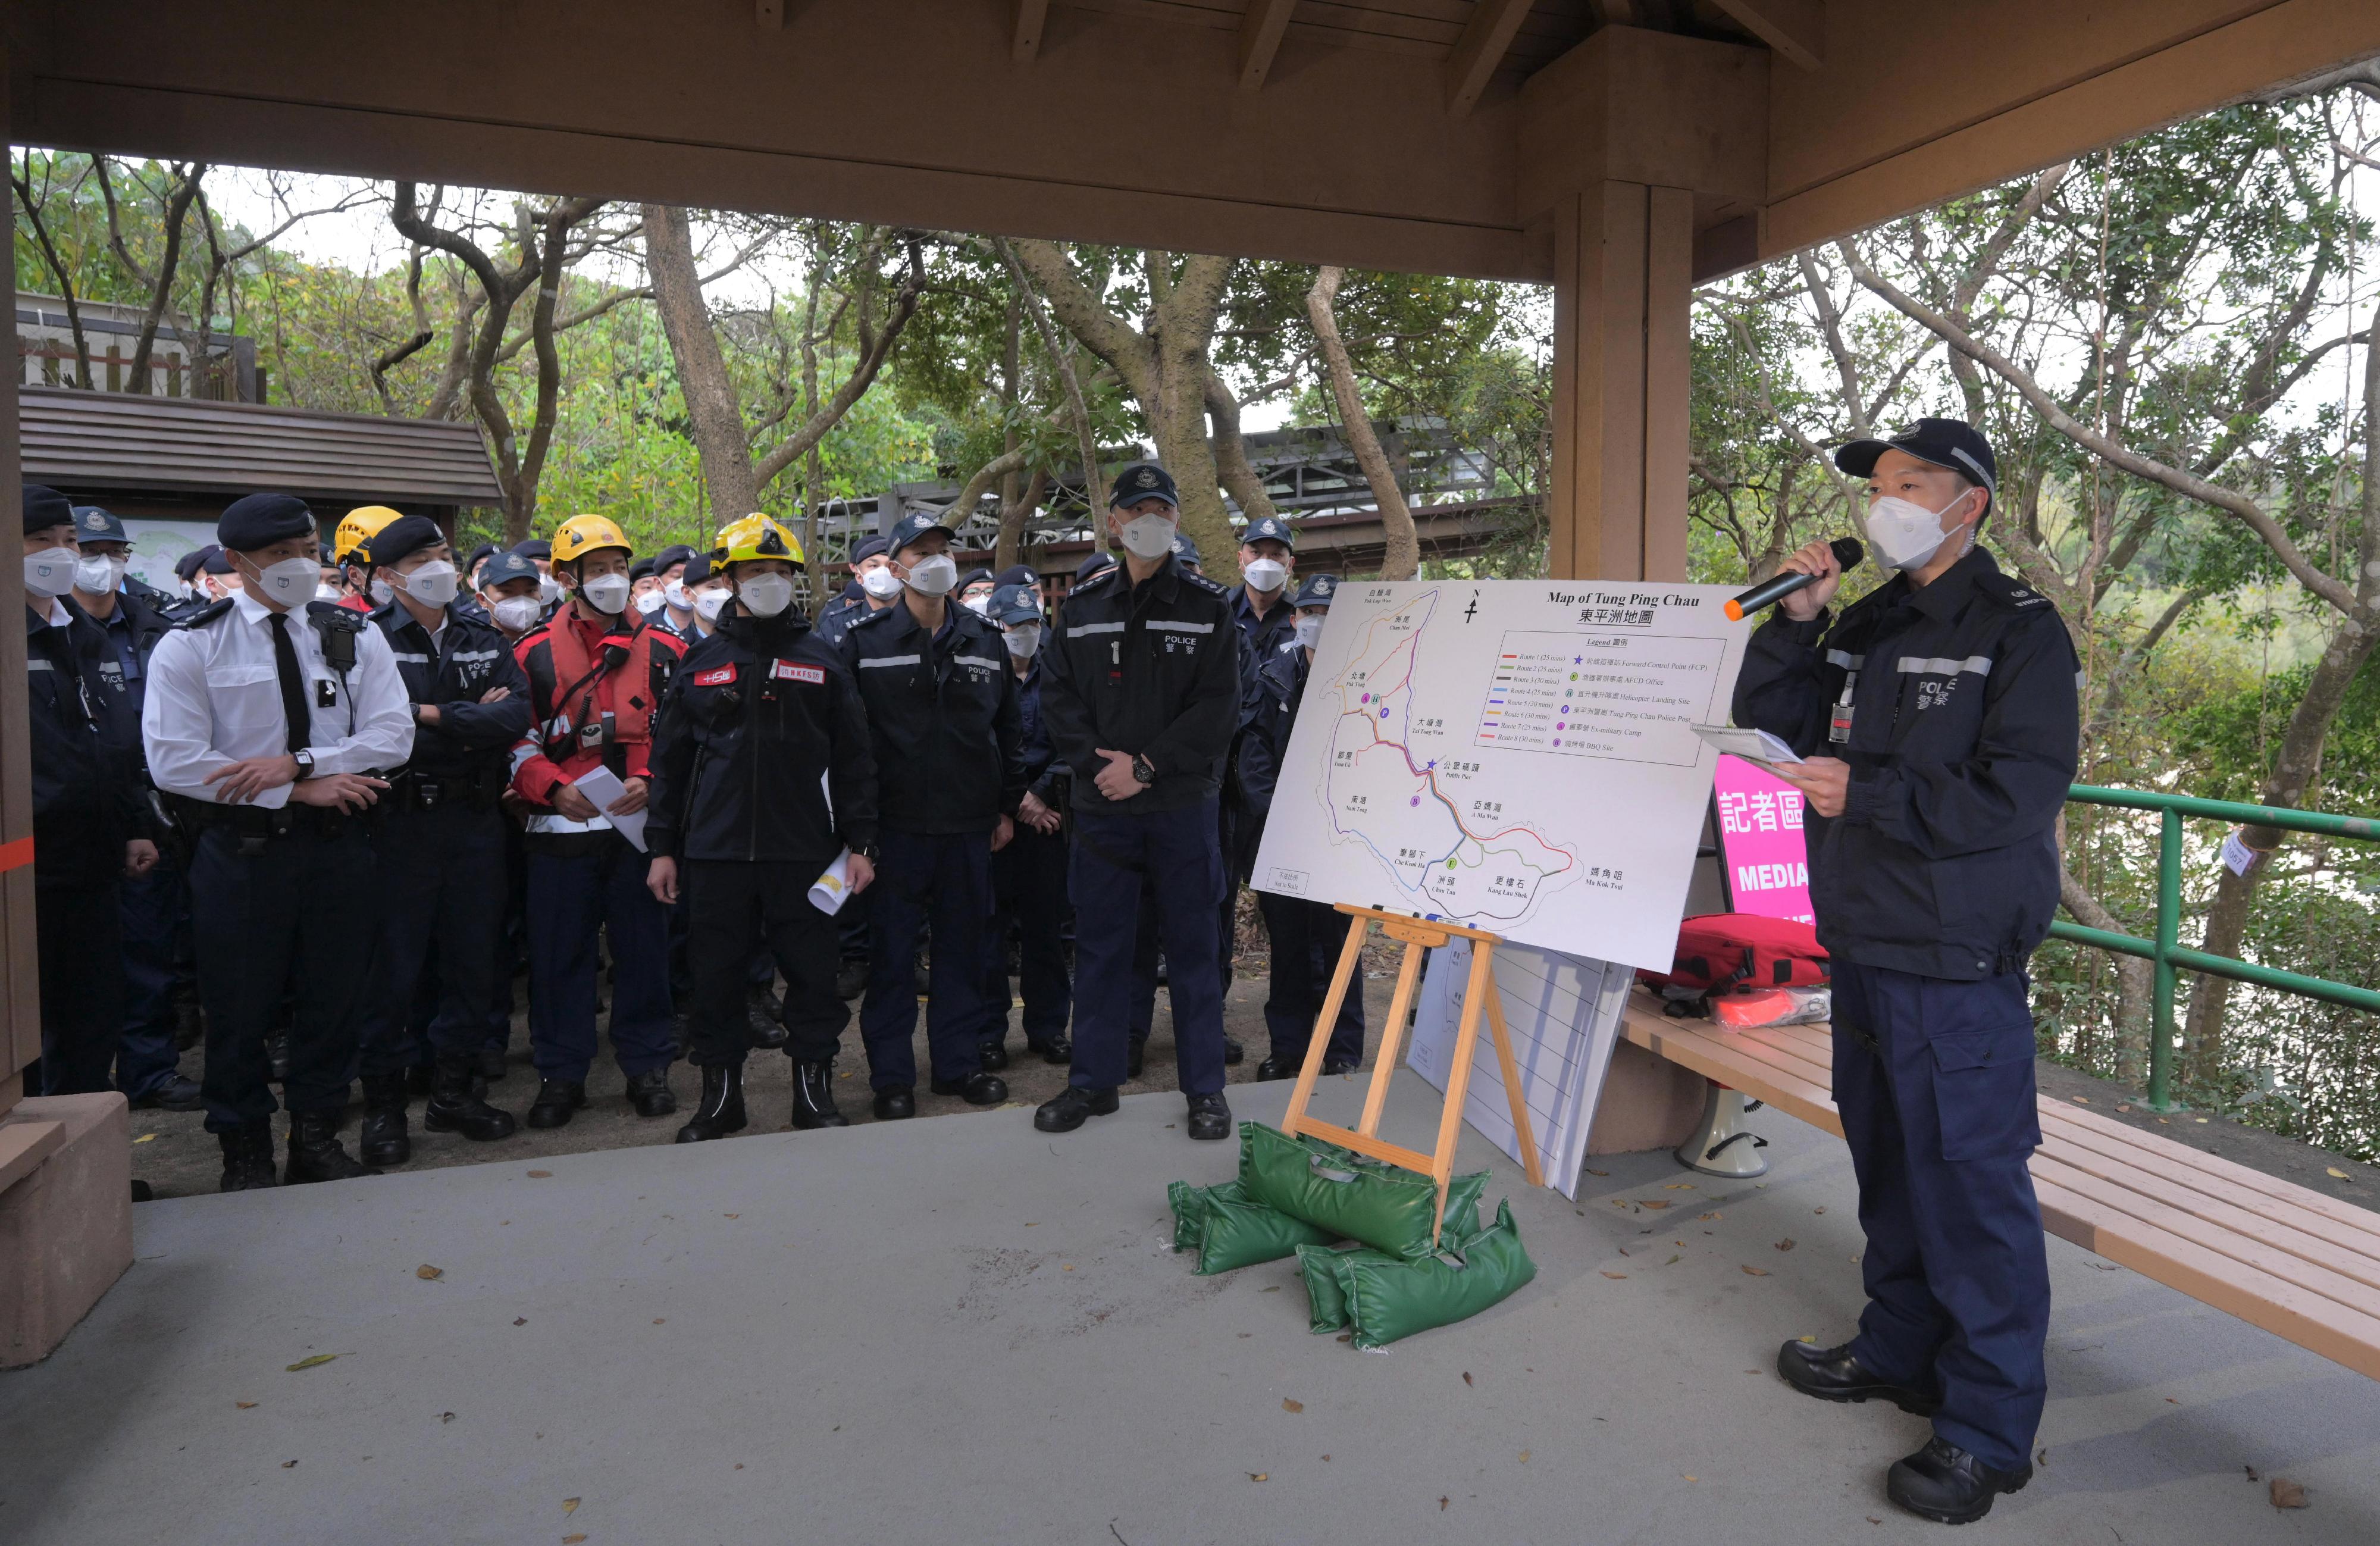 The Government conducted an inter-departmental exercise, "Checkerboard III", today (January 12). Photo shows the Police Tactical Unit arriving at the Police Command Post on Tung Ping Chau to conduct briefing and arrange deployment.